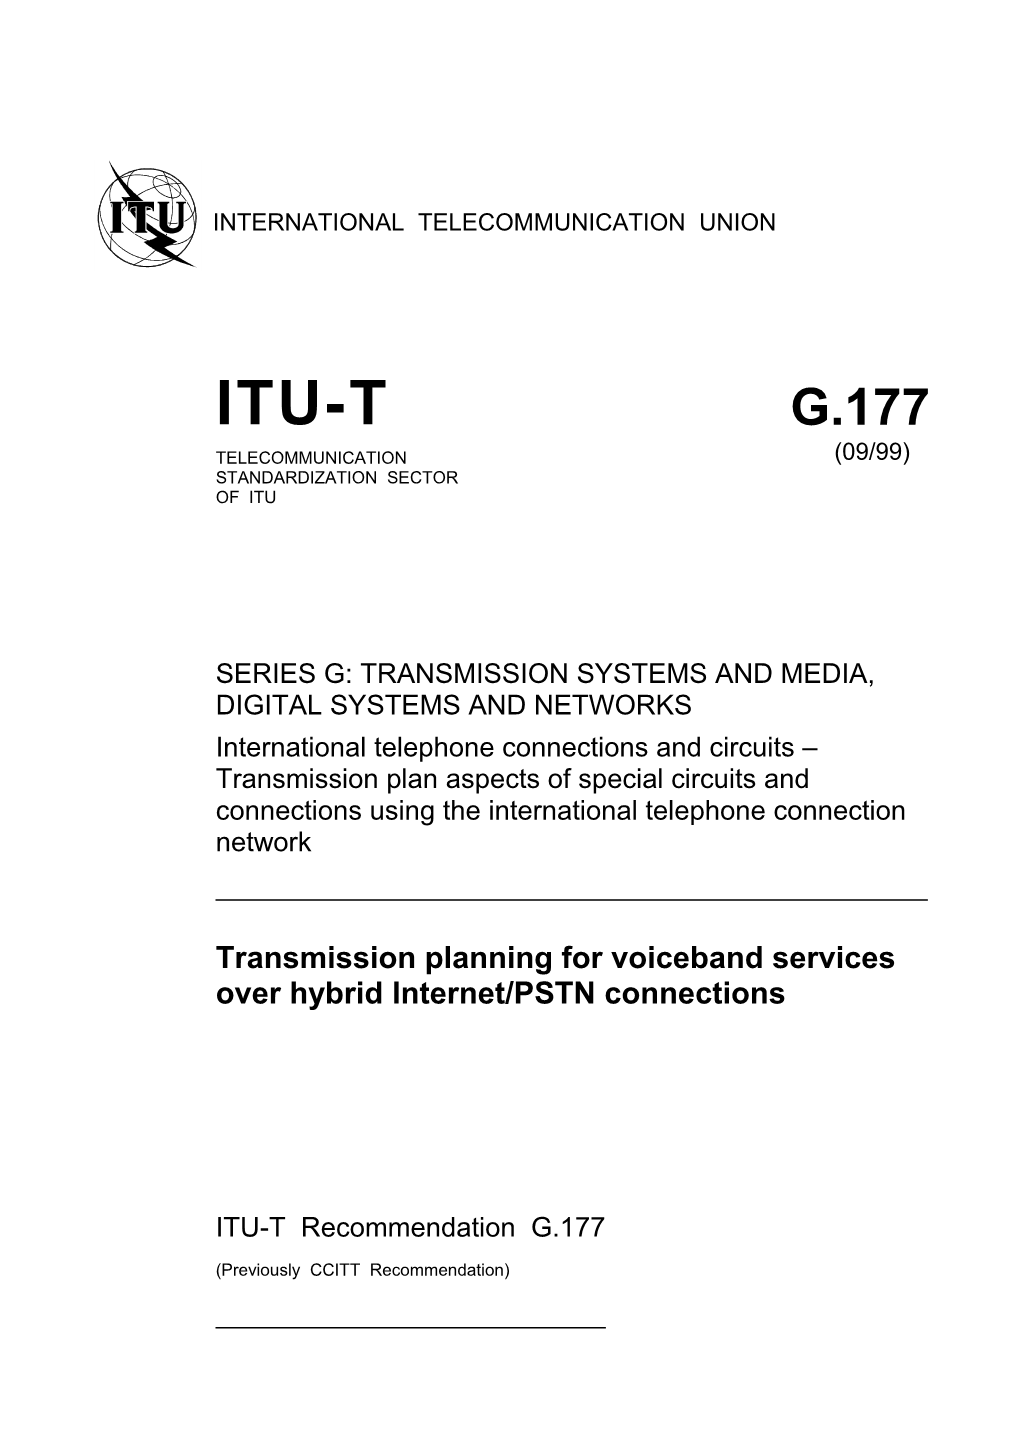 Series G: Transmission Systems and Media, Digital Systems and Networks